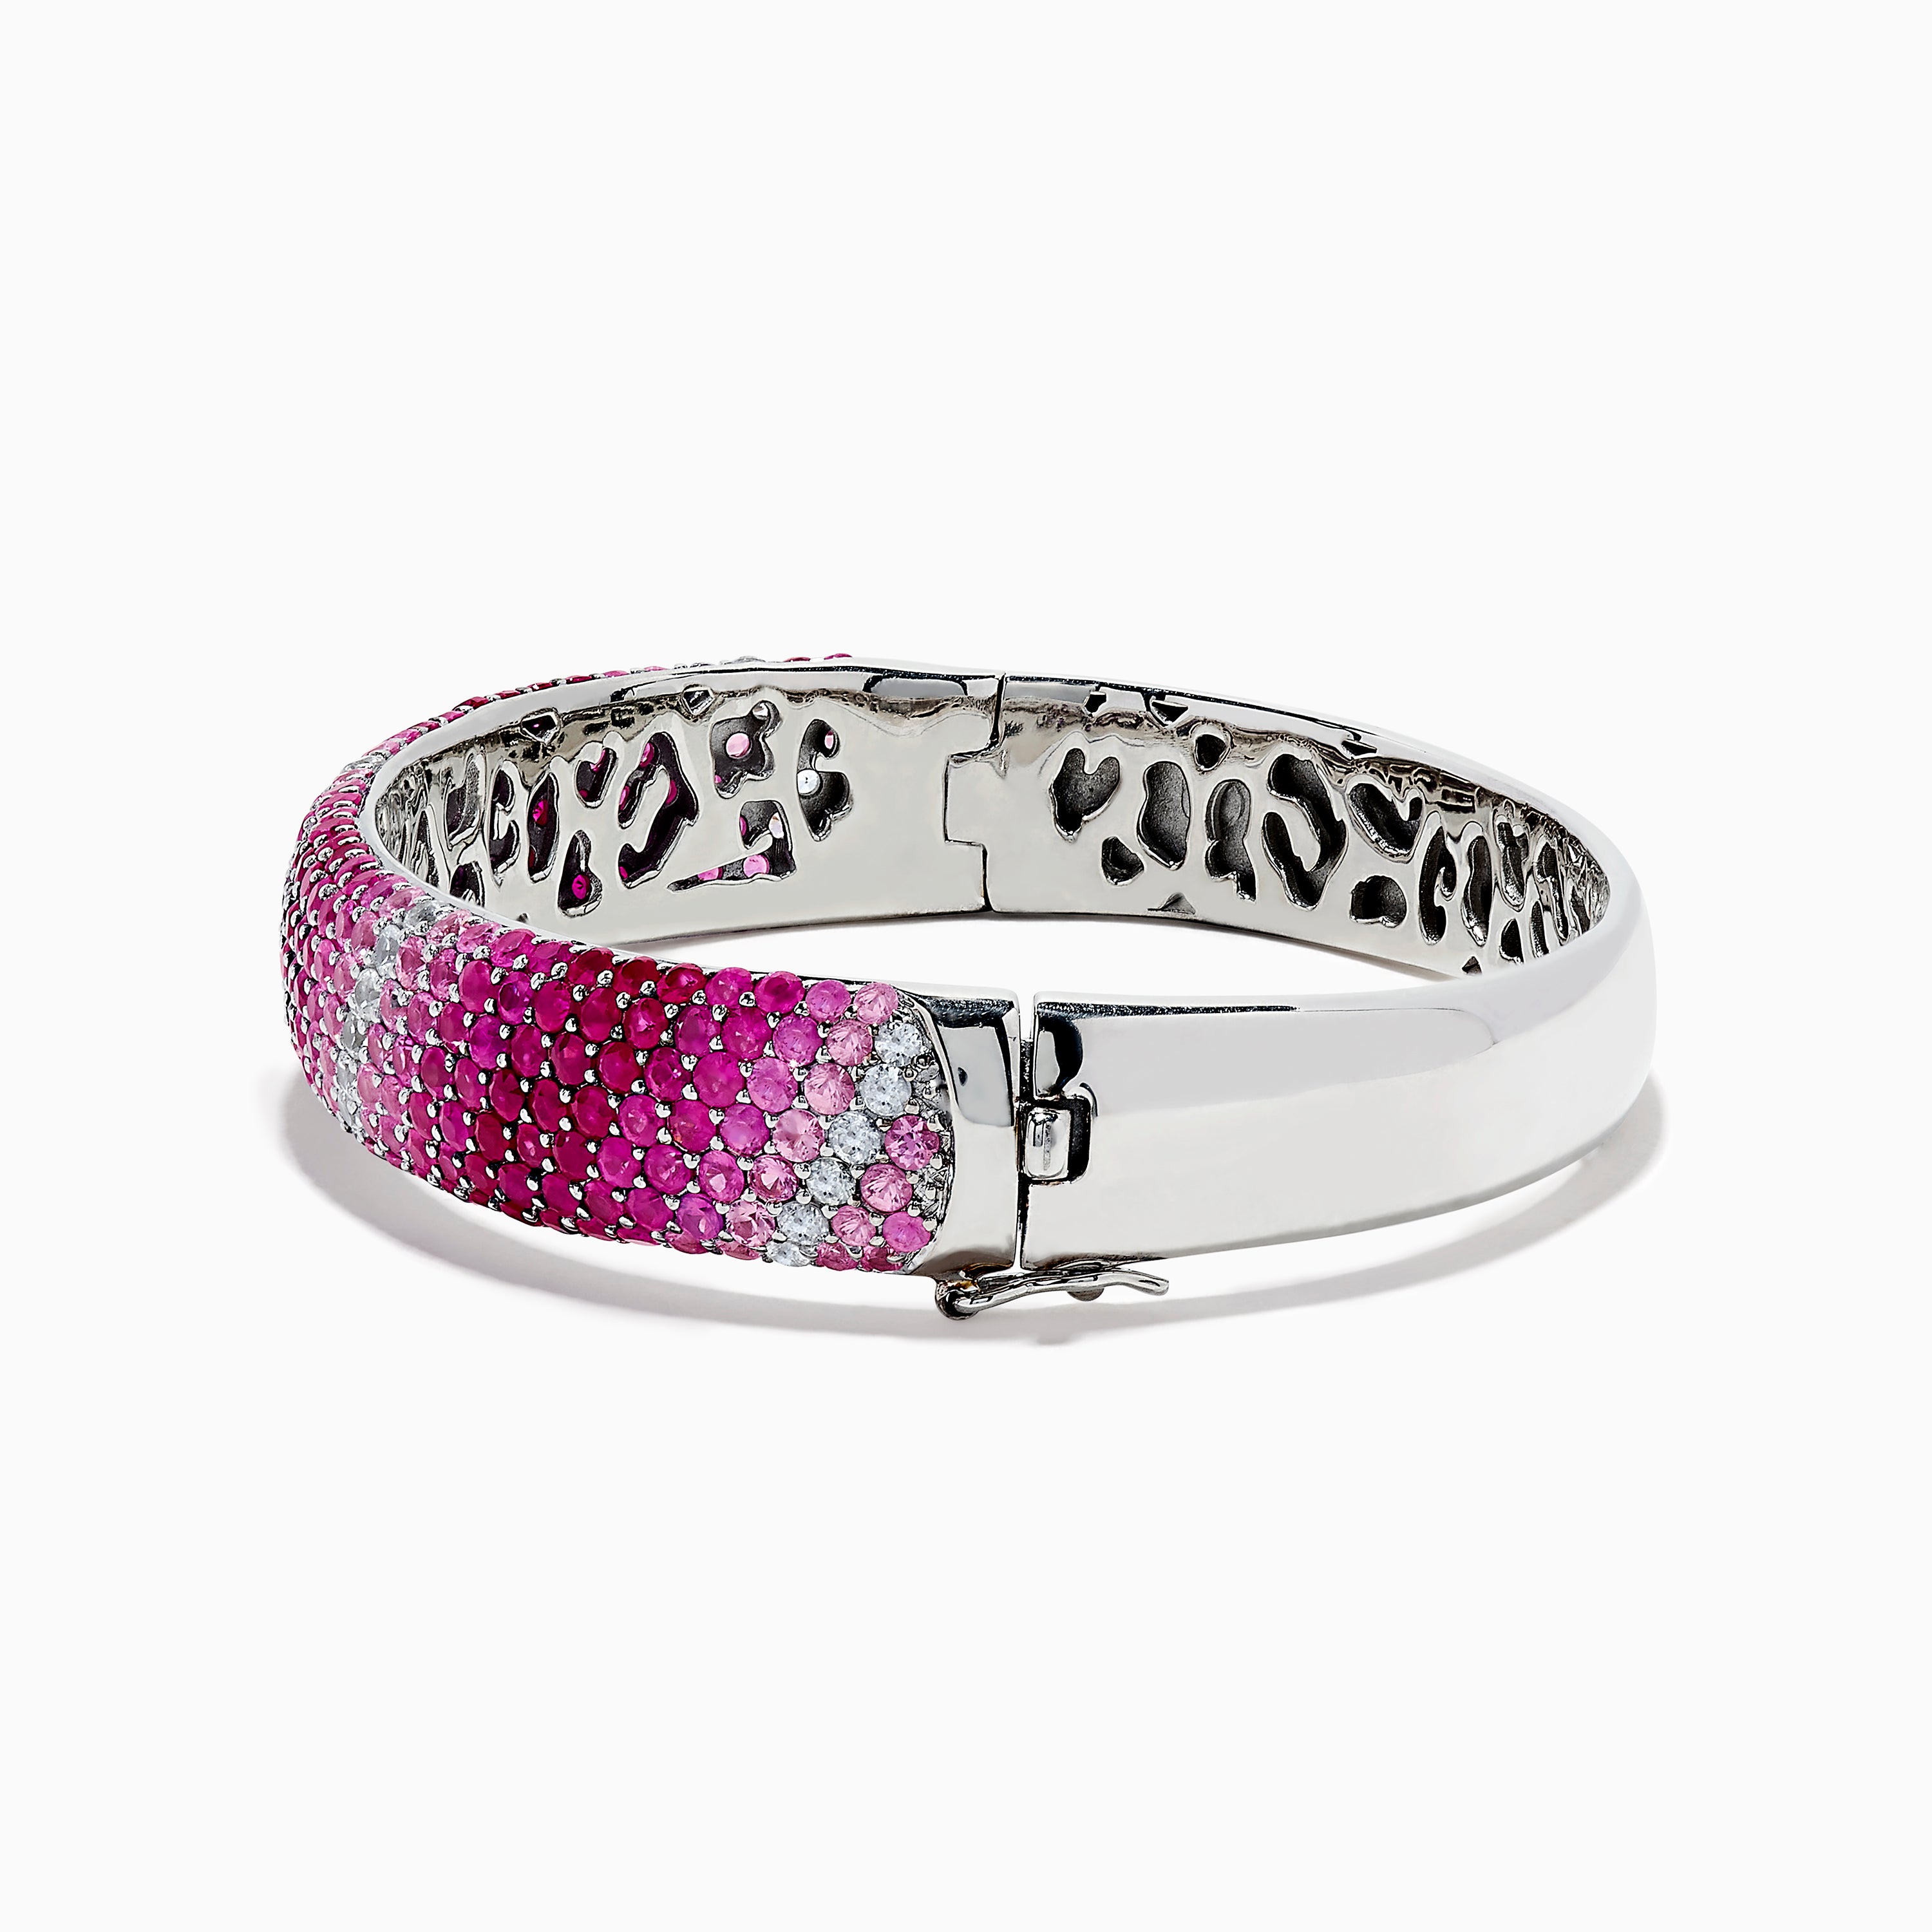 Pink and White Lab-Created Sapphire Twist Bangle in Sterling Silver - 7.25